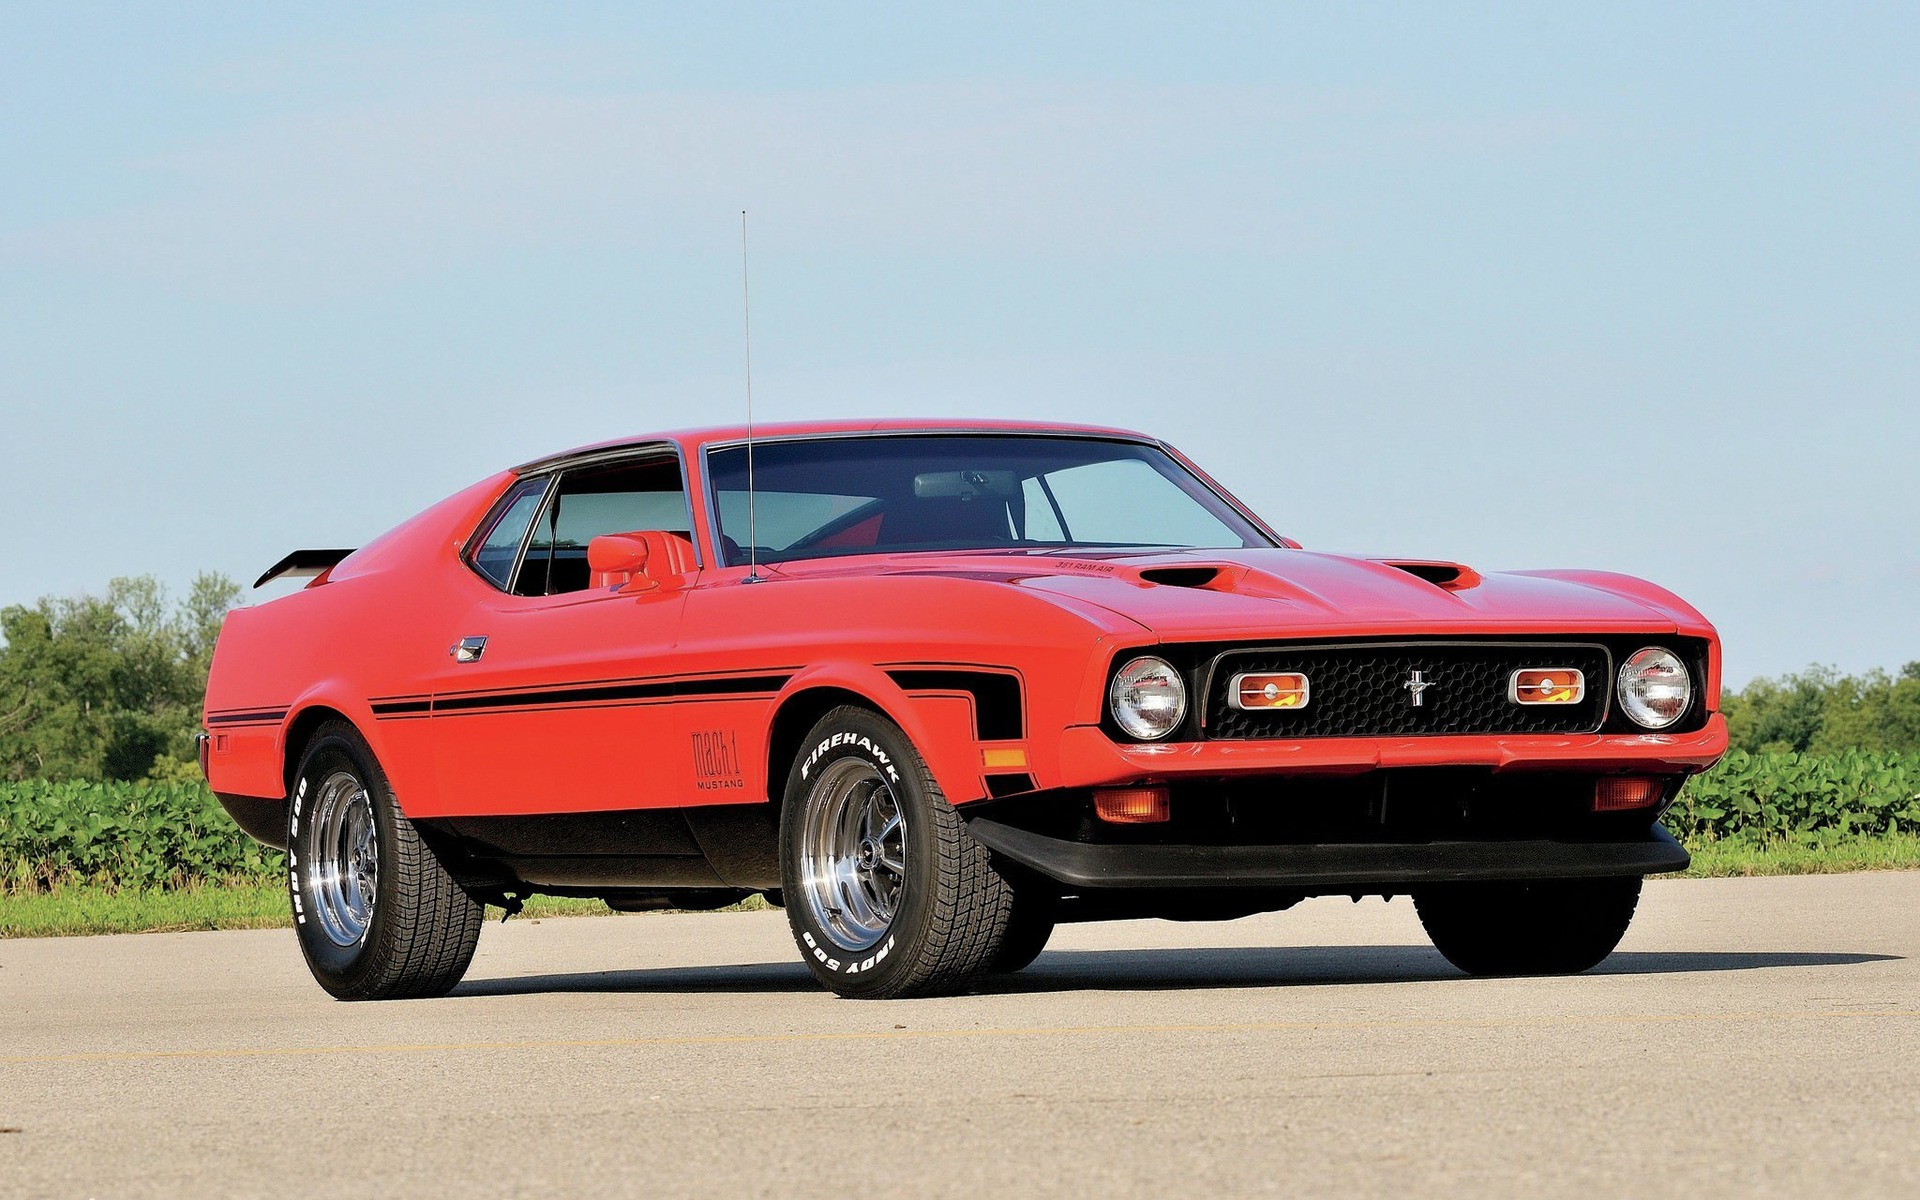 Is the Ford Mustang Mach 1 Coming Back? - The Car Guide